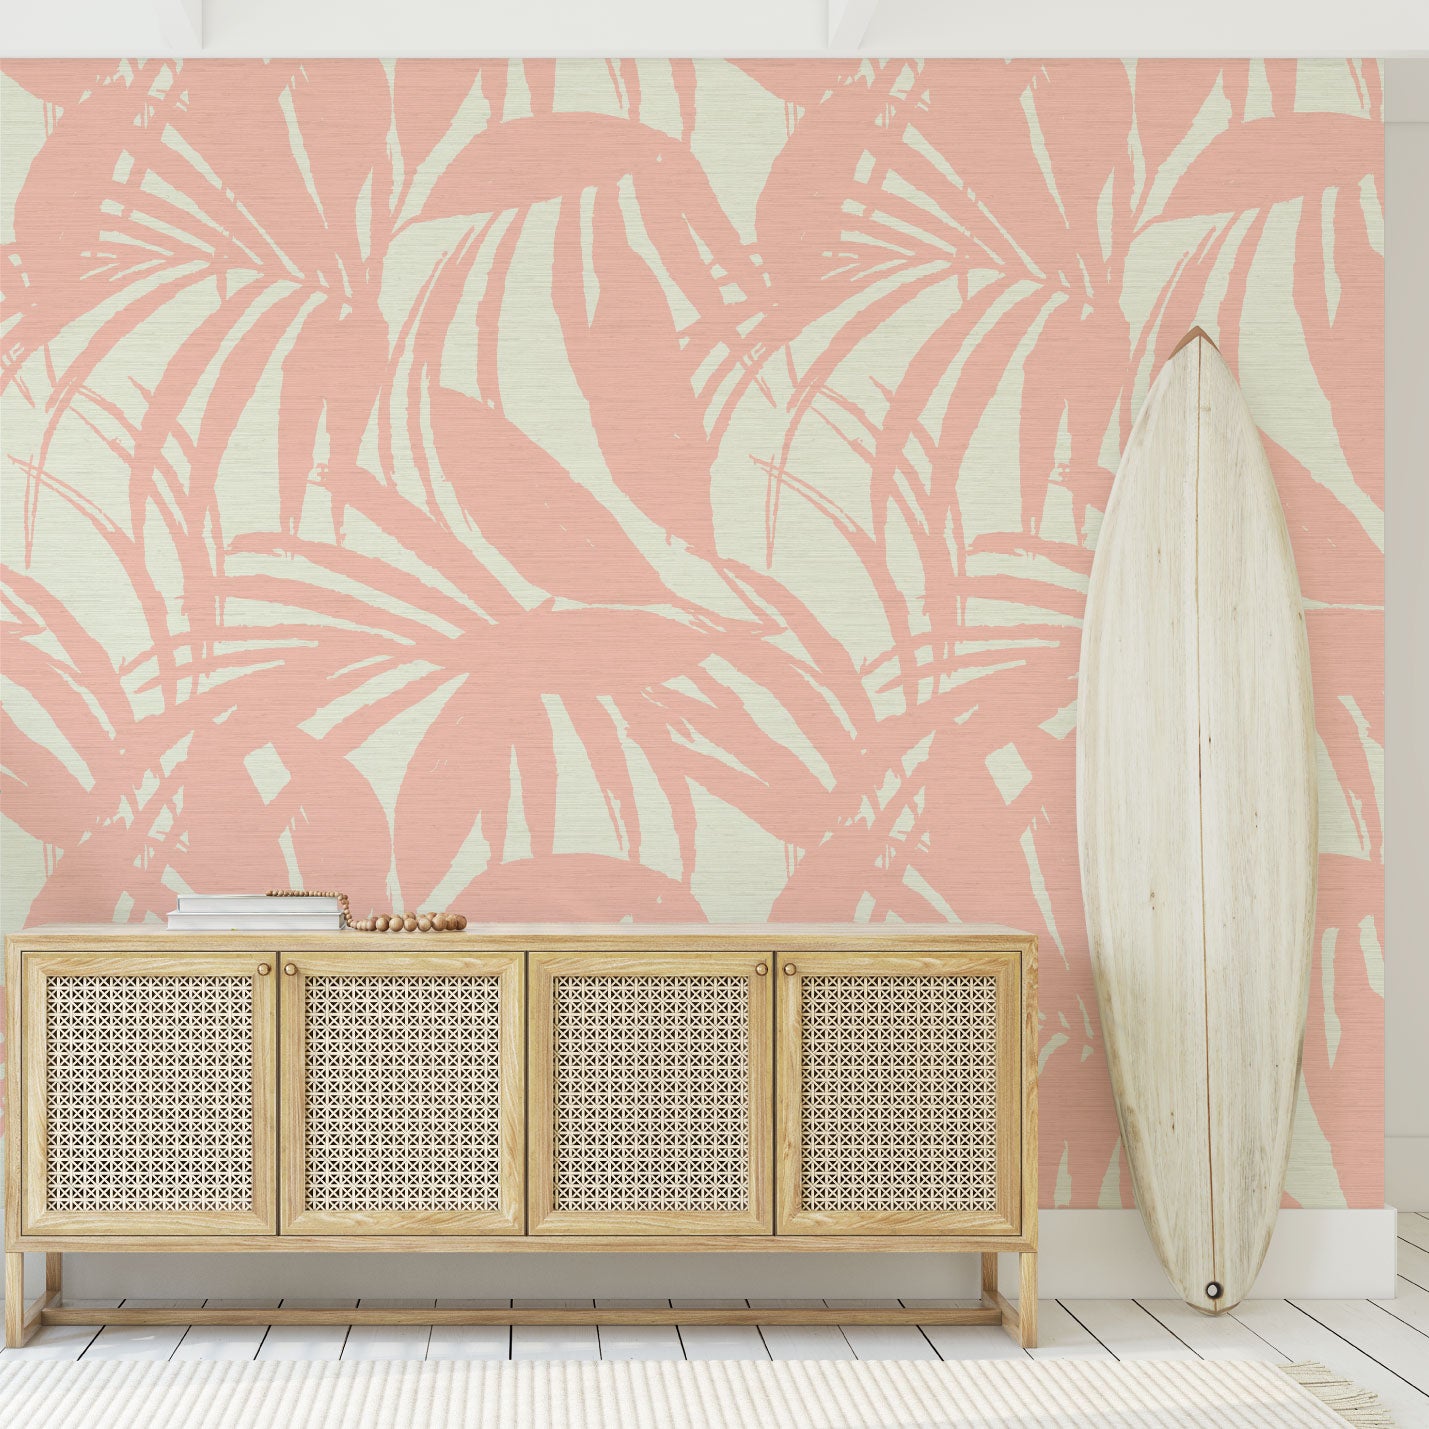 Load image into Gallery viewer, printed grasscloth wallpaper oversize tropical leaf Natural Textured Eco-Friendly Non-toxic High-quality  Sustainable practices Sustainability Interior Design Wall covering Bold retro chic custom jungle garden botanical Seaside Coastal Seashore Waterfront Vacation home styling Retreat Relaxed beach vibes Beach cottage Shoreline Oceanfront white peach pink coral pastel baby orange entrance foyer surf
